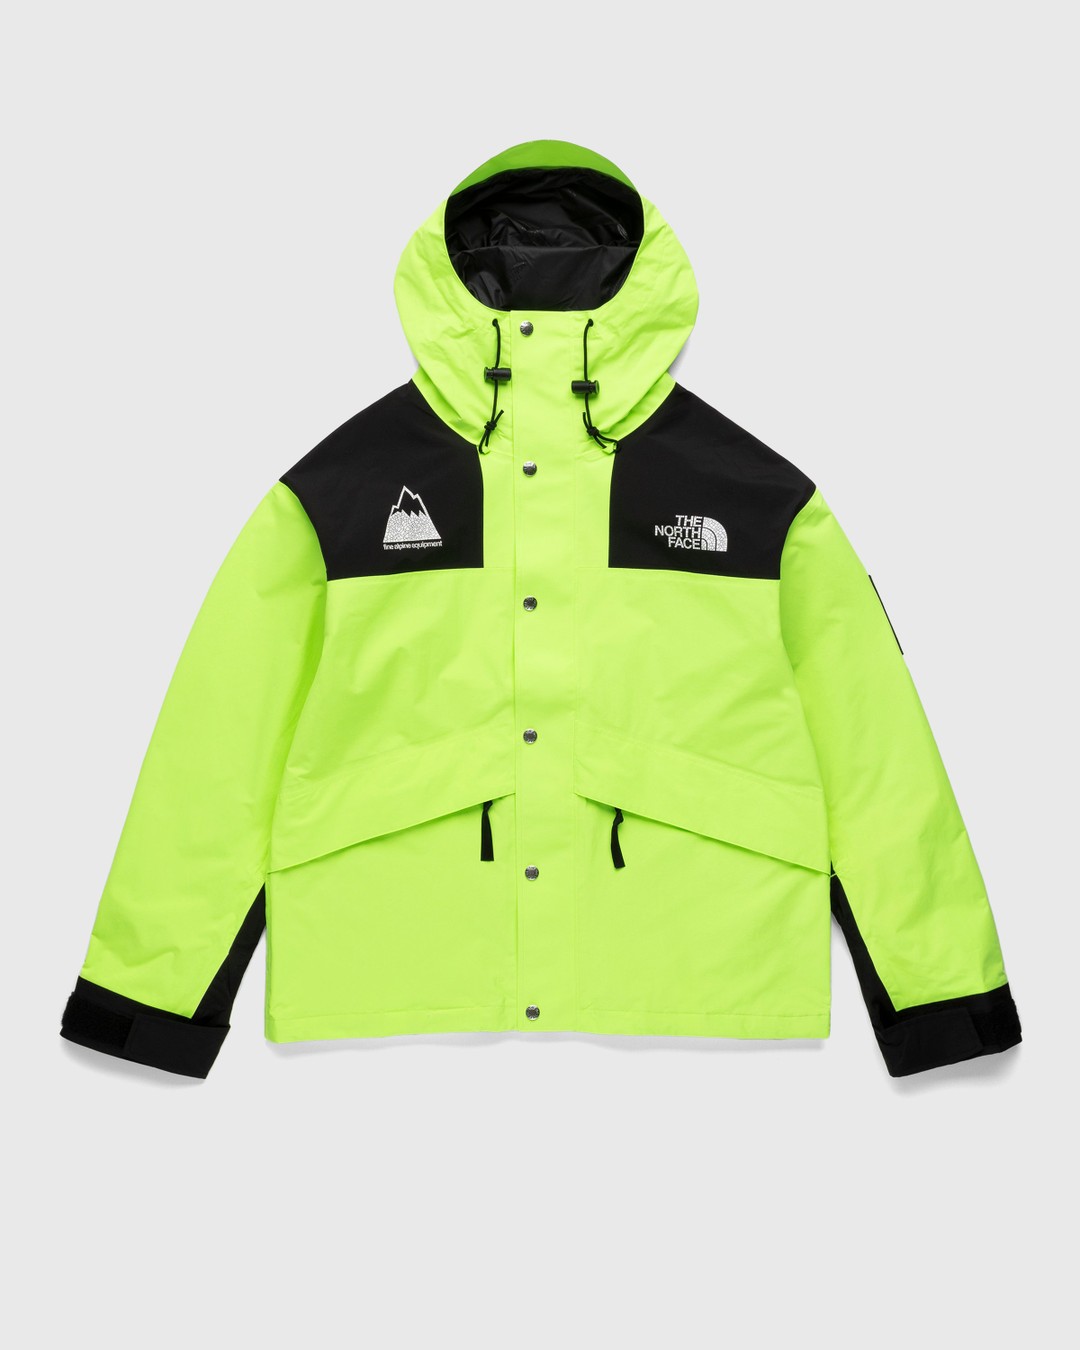 The North Face – M Origins 86 Mountain Jacket Safety Green - Windbreakers - Green - Image 1